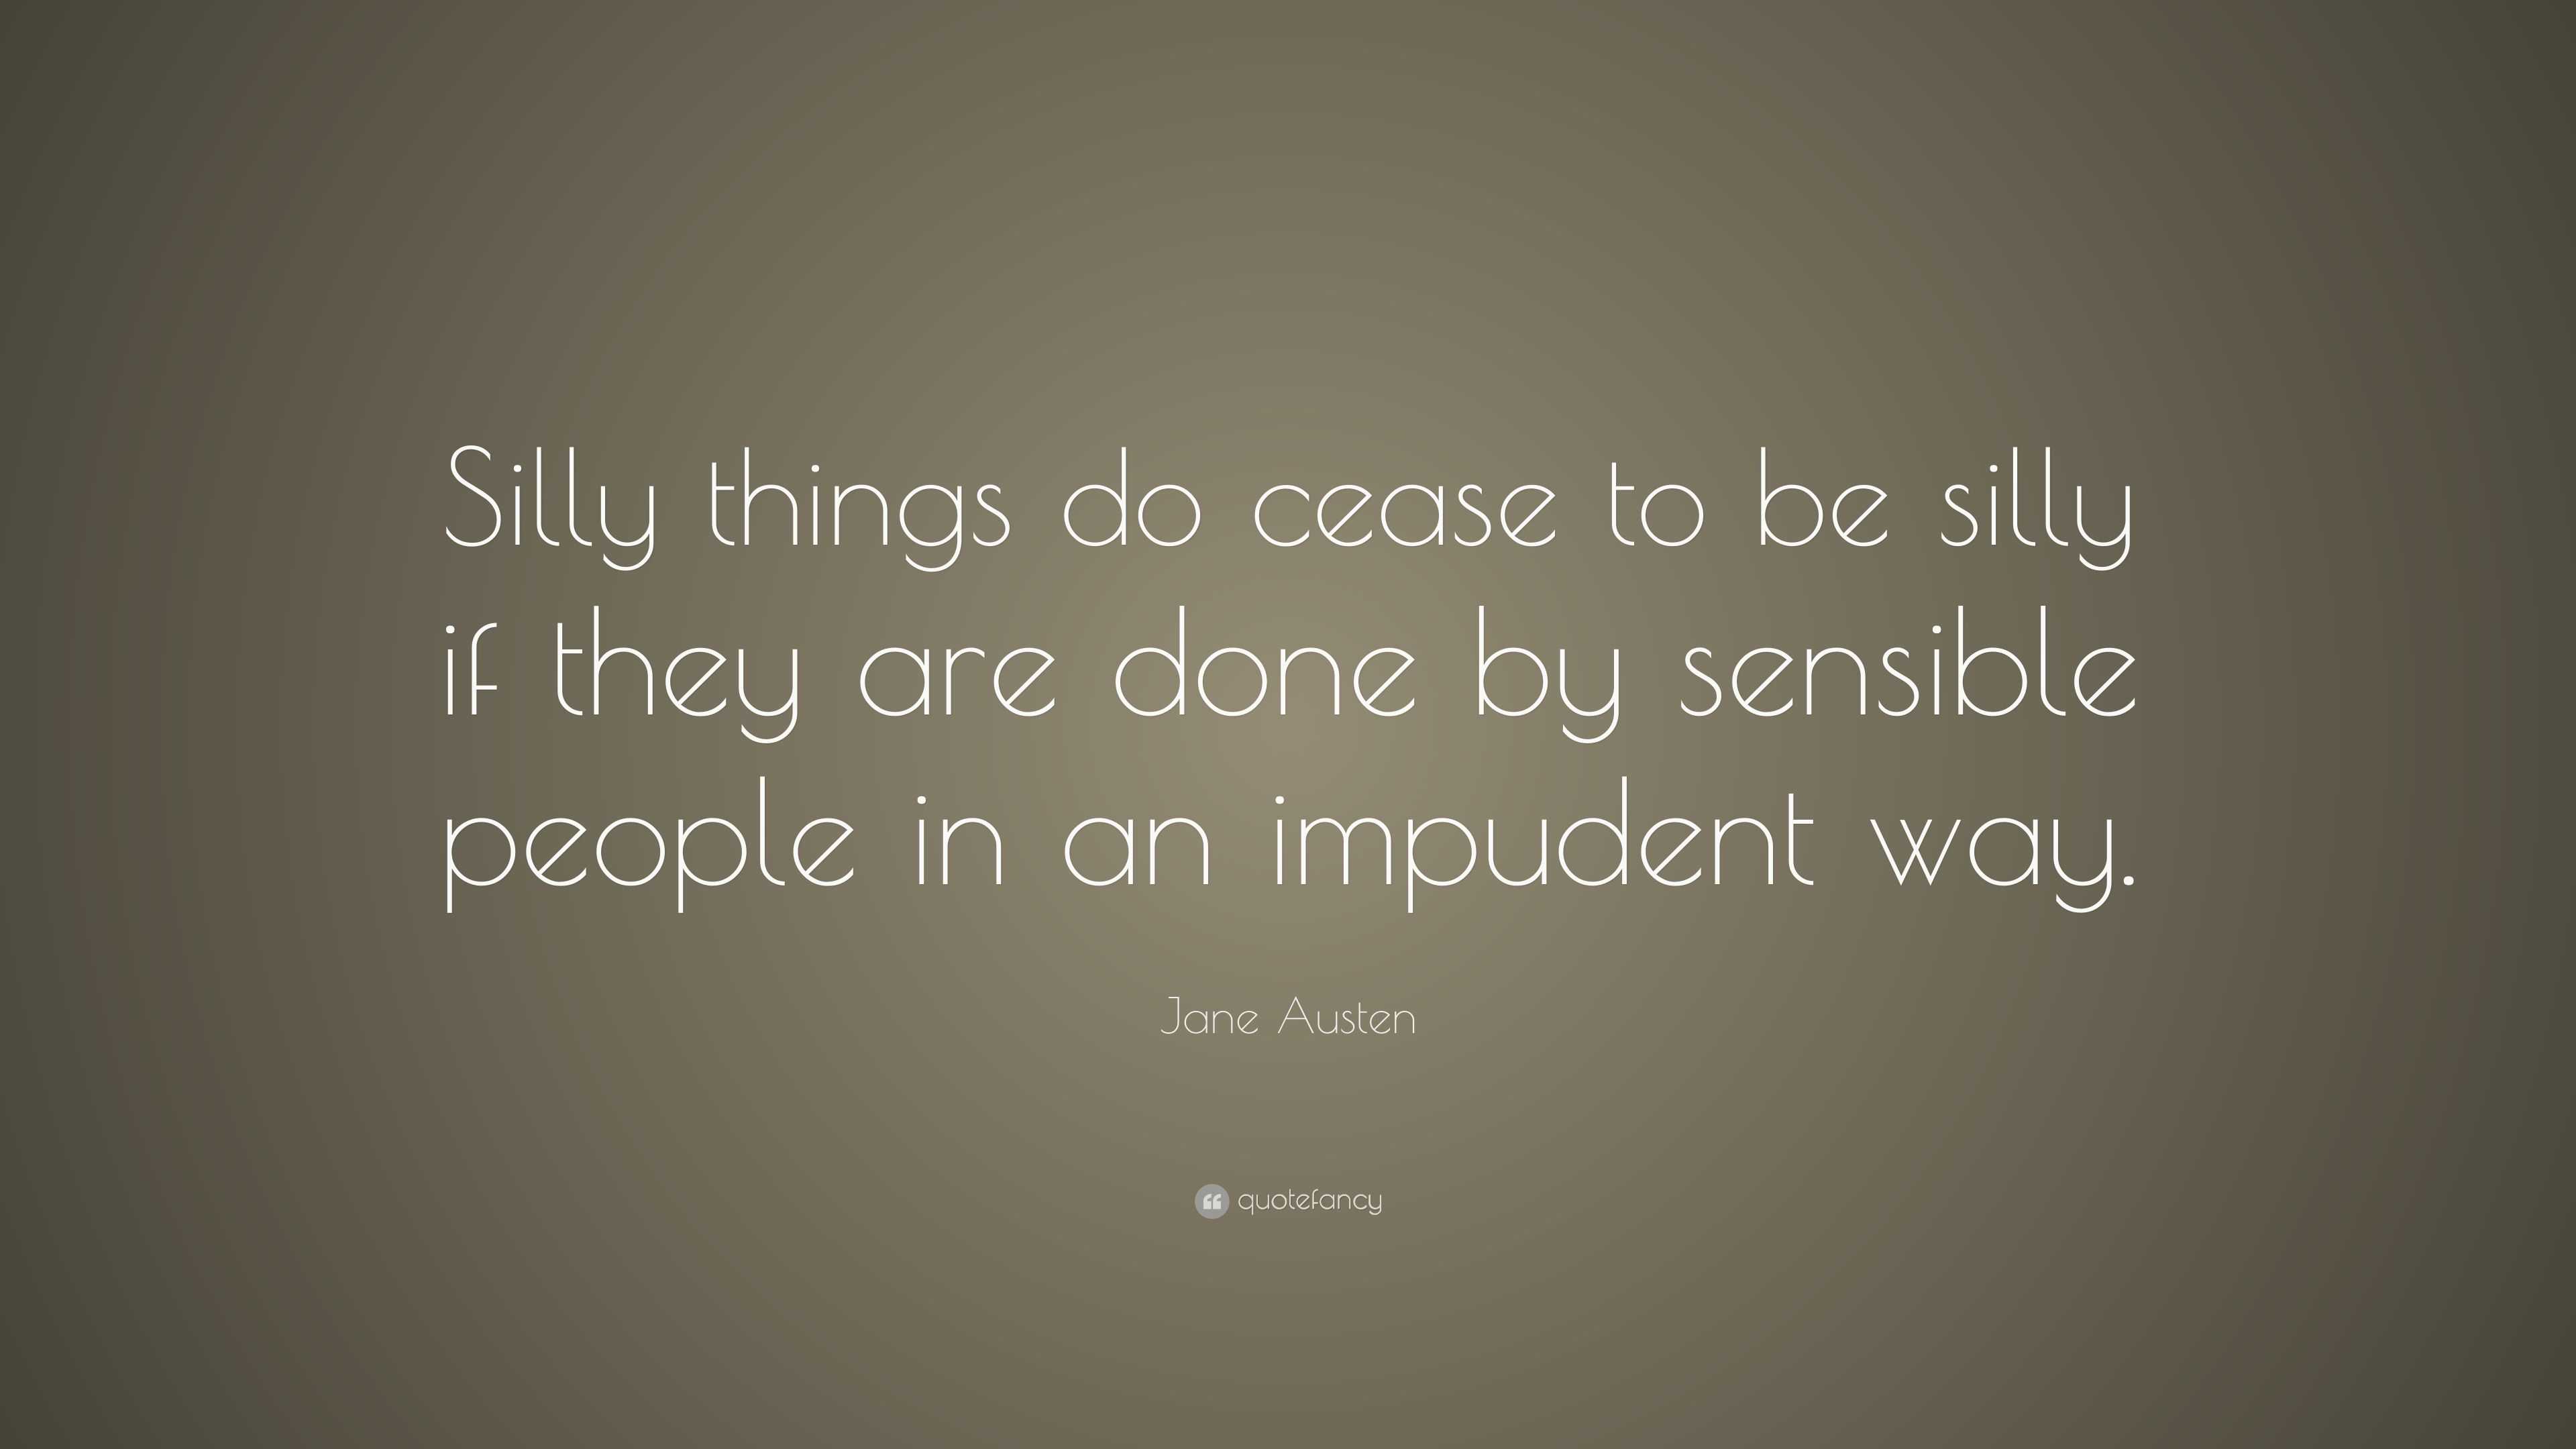 Jane Austen Quote: “Silly things do cease to be silly if they are done ...